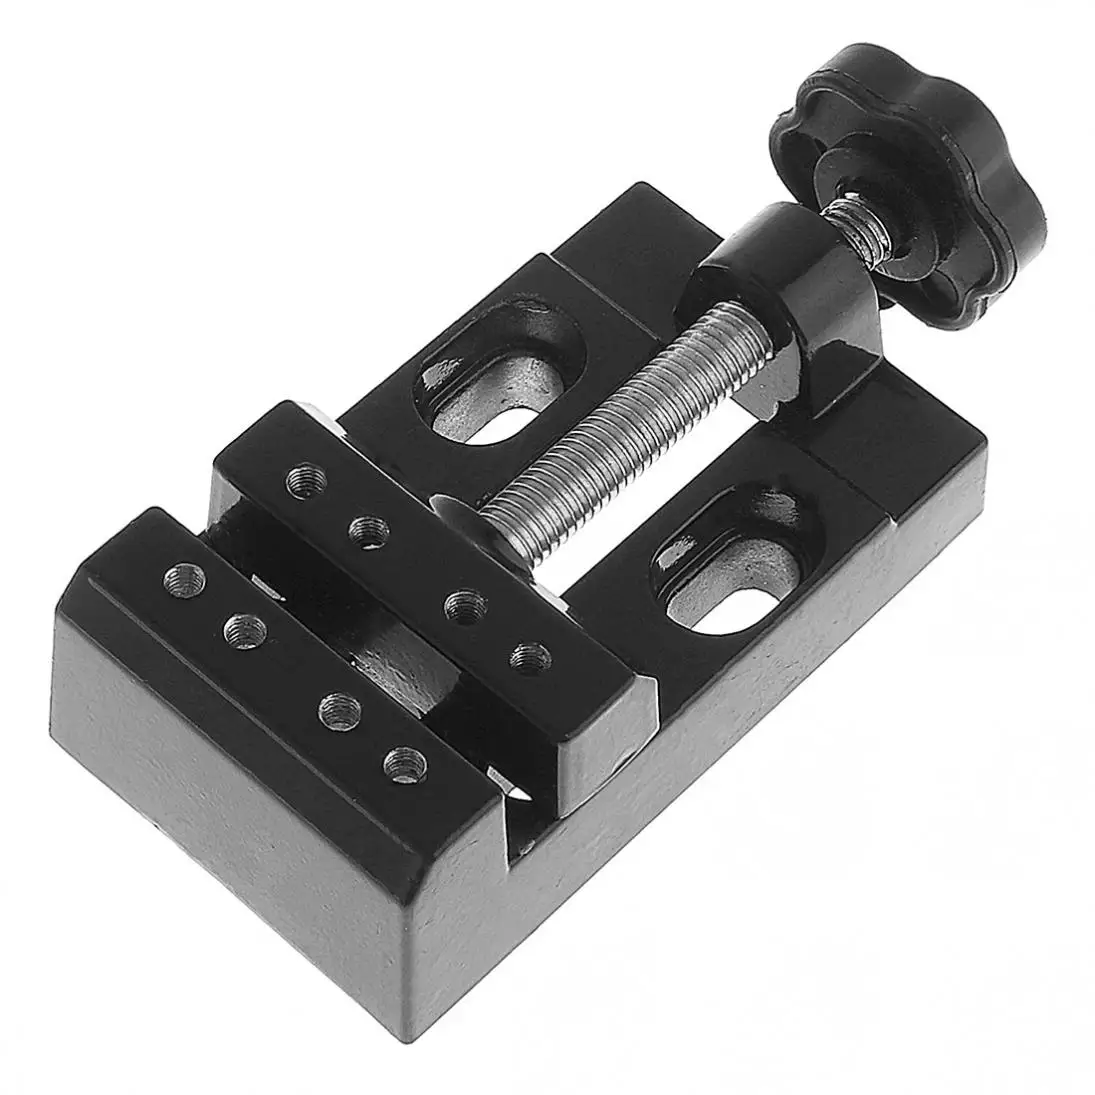 mini flat clamp table jaw bench clamp drill press vice opening parallel table vise diy sculpture craft carving tool New DIY Sculpture Craft Jaw Bench Clamp Press Vice Opening Parallel Table Vise for Jaw Bench Clamp Drill